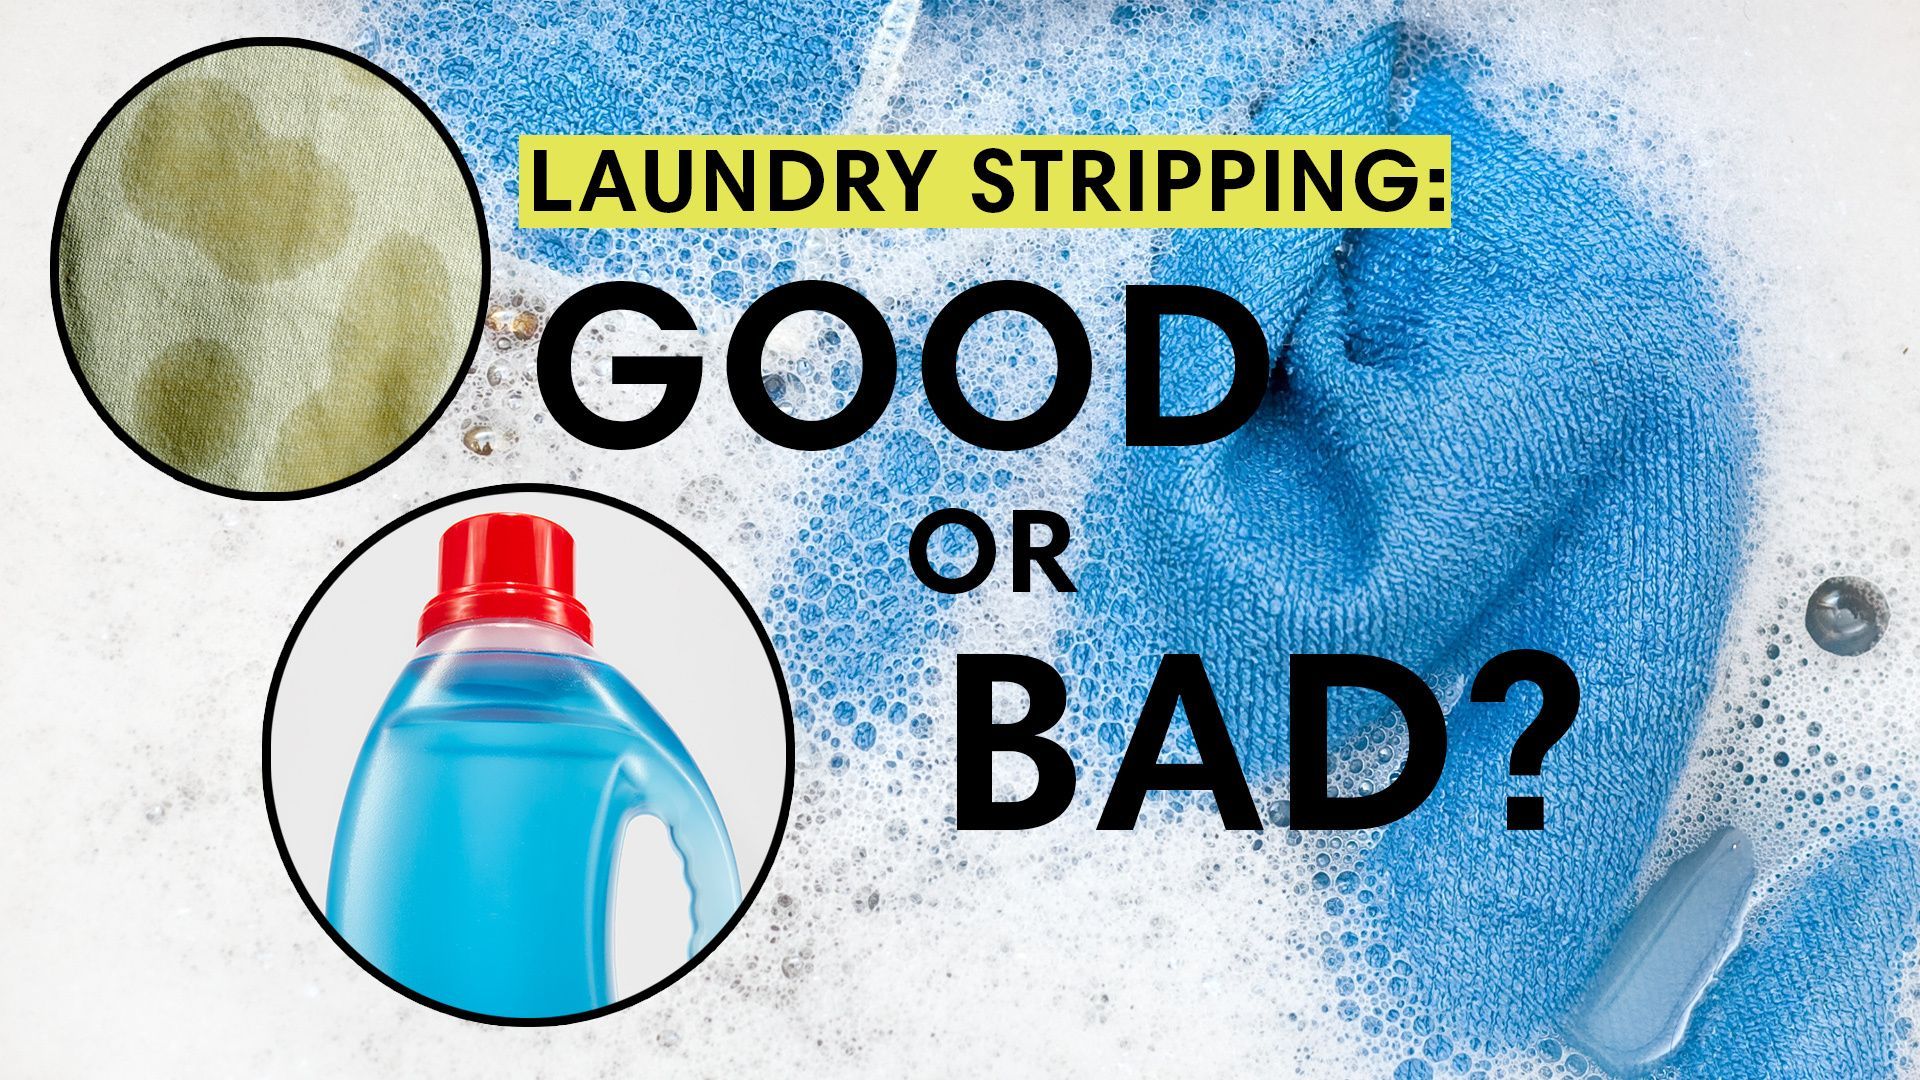 How to Get Ink Out of Clothes- Stain Removal Guide